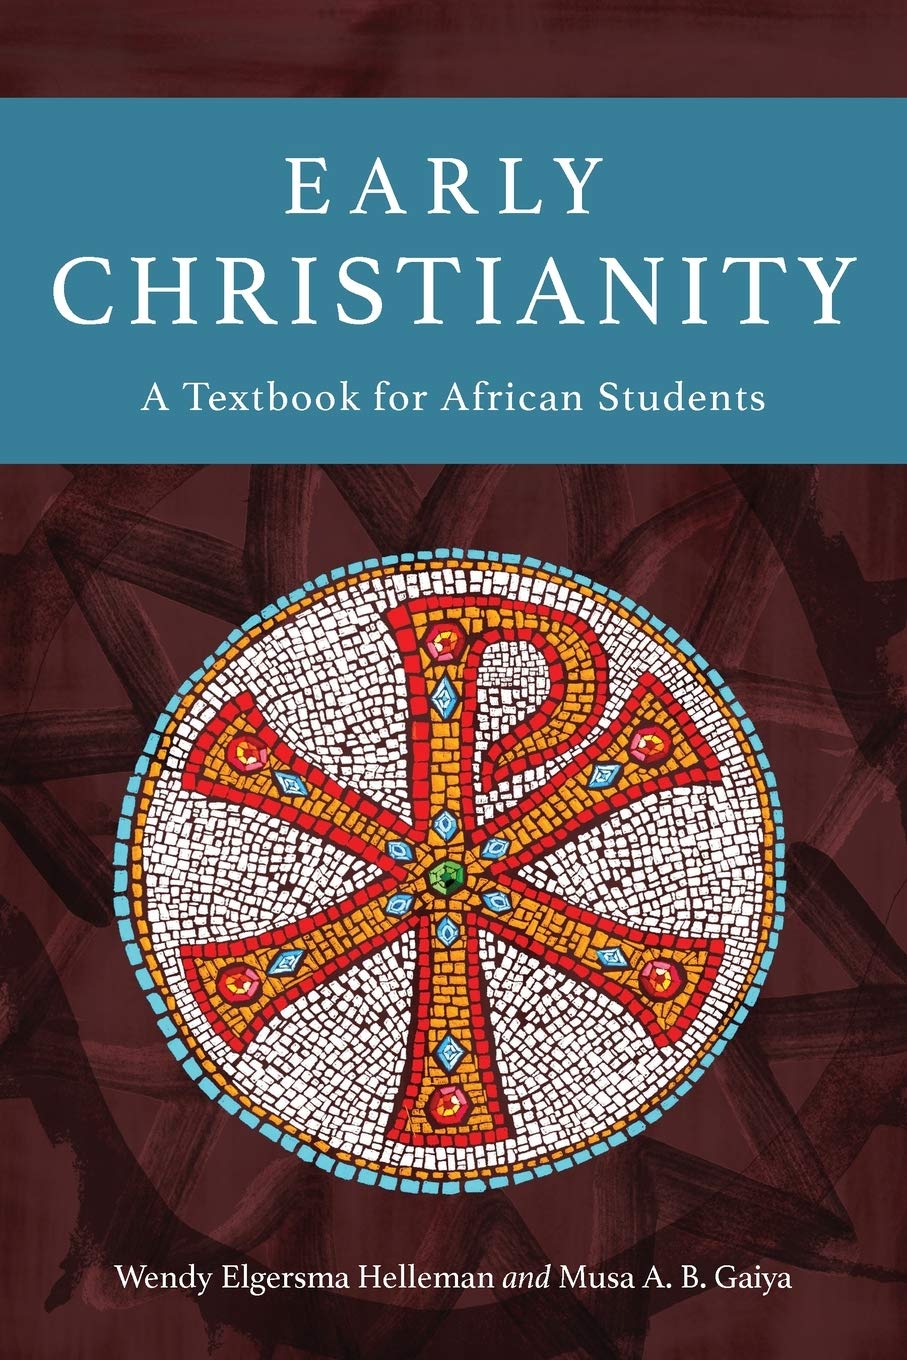 Early Christianity: A Textbook for African Students by Wendy Elgersma Helleman and Musa A B Gaiya